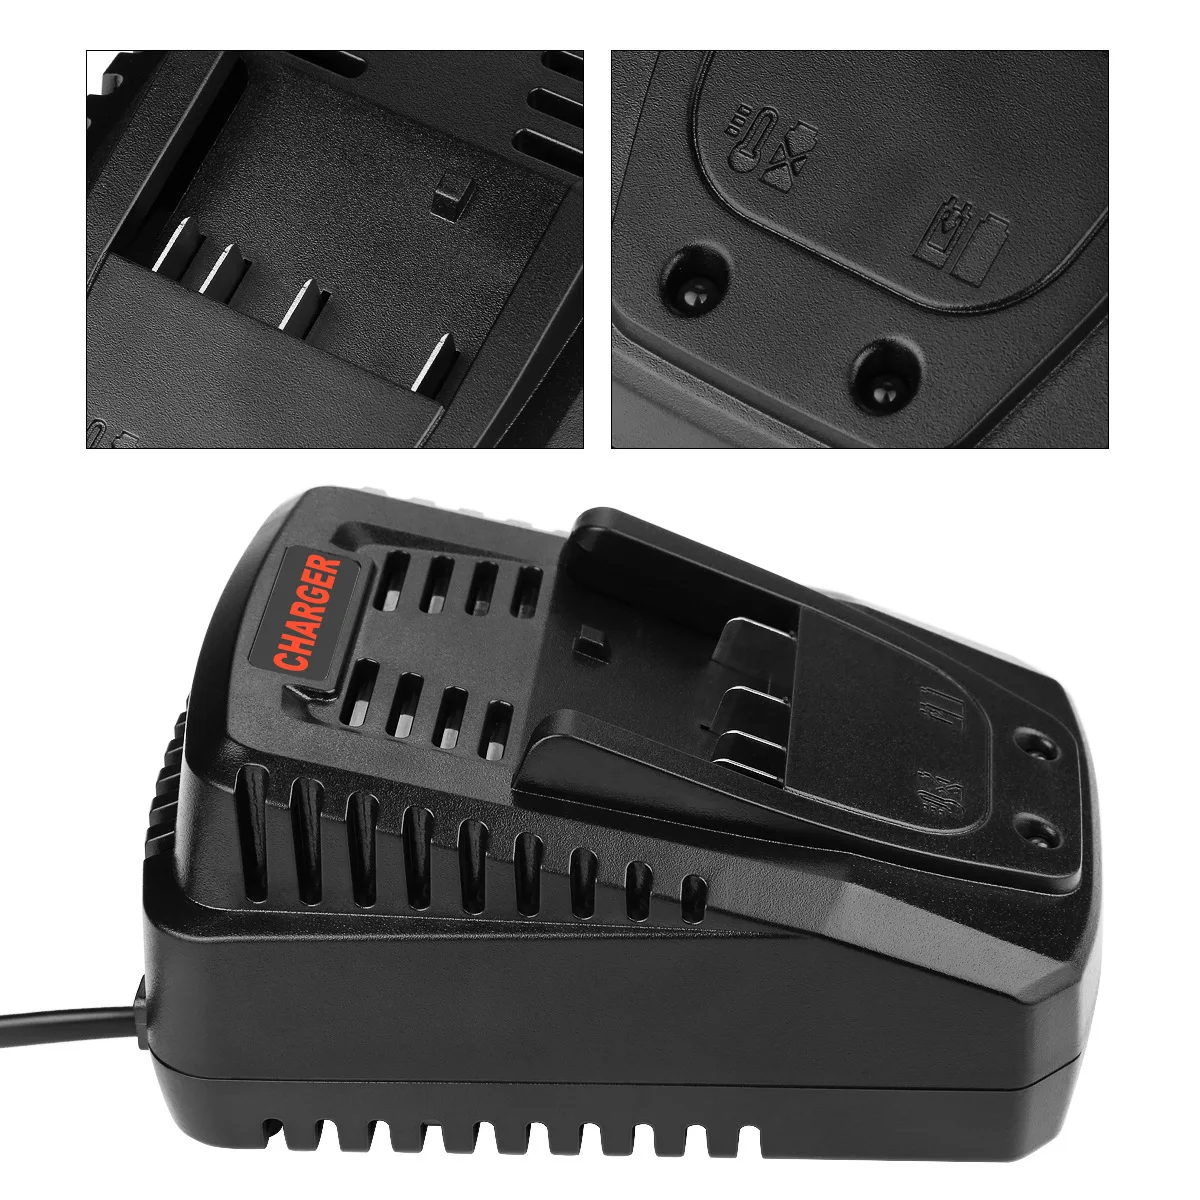 new 3a li ion battery charger for bosch 14 4v 18v battery bat609 bat609g bat618 bat618g charger al1860cv al1814cv al1820cv free global shipping